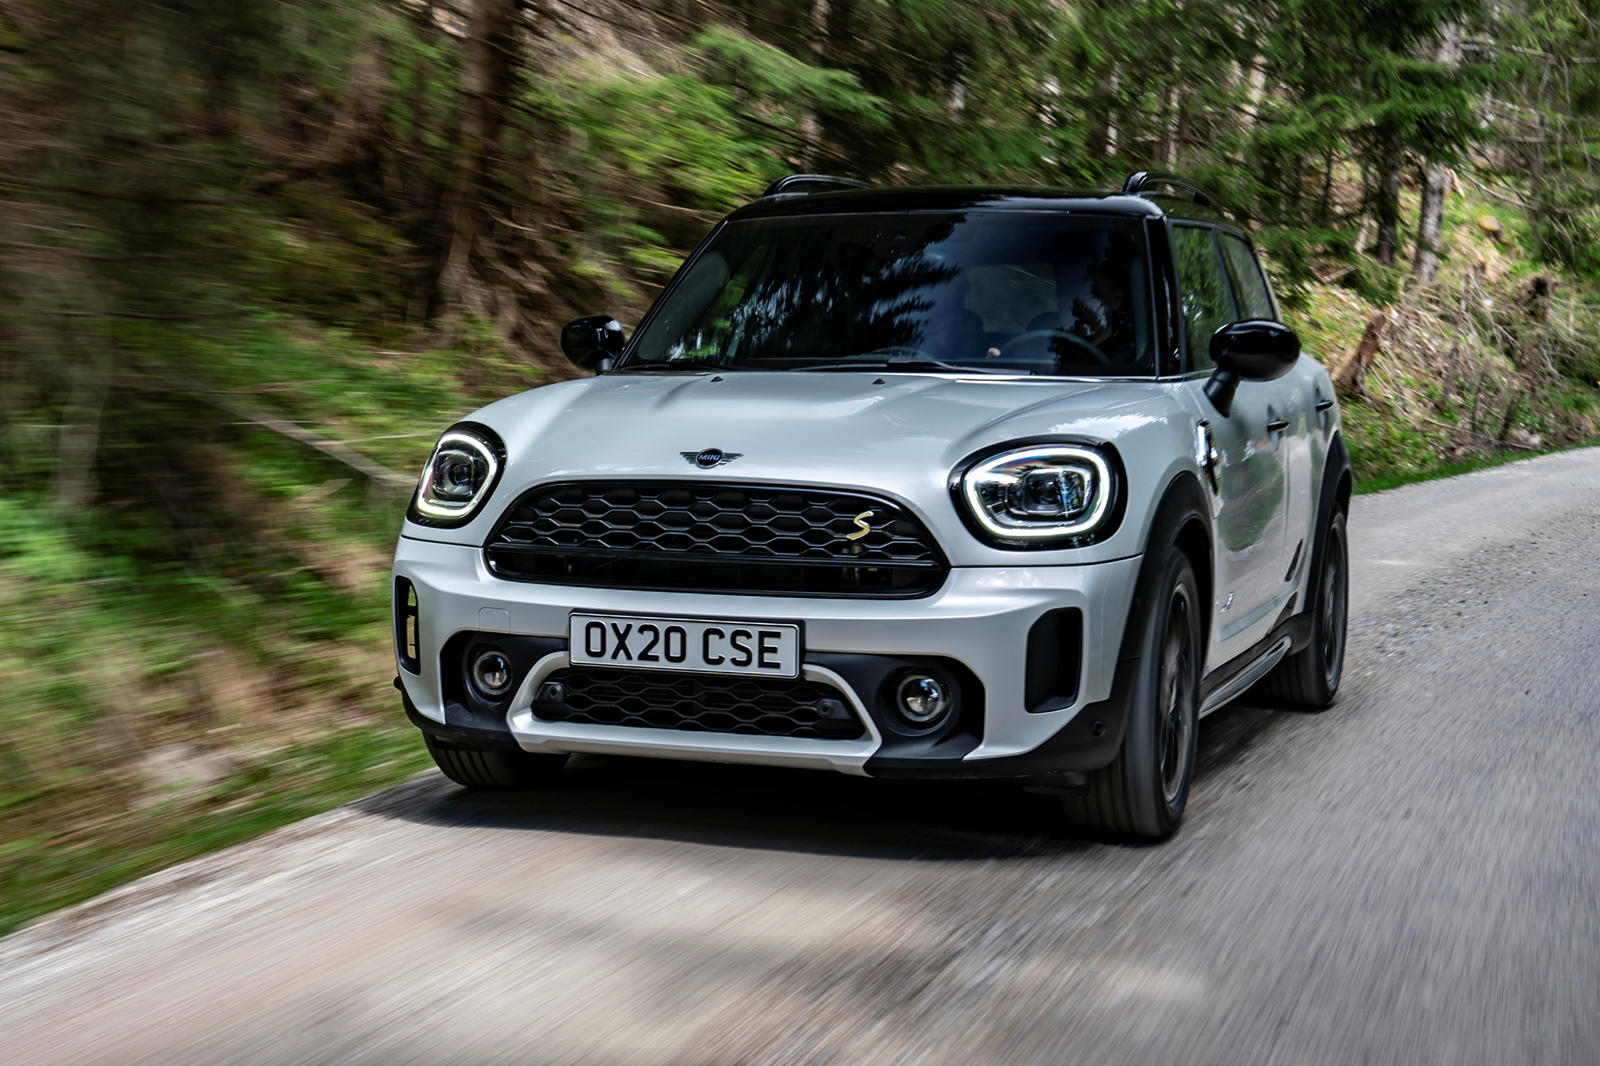 2022 Mini Cooper Countryman Plug-in Hybrid Front View Driving